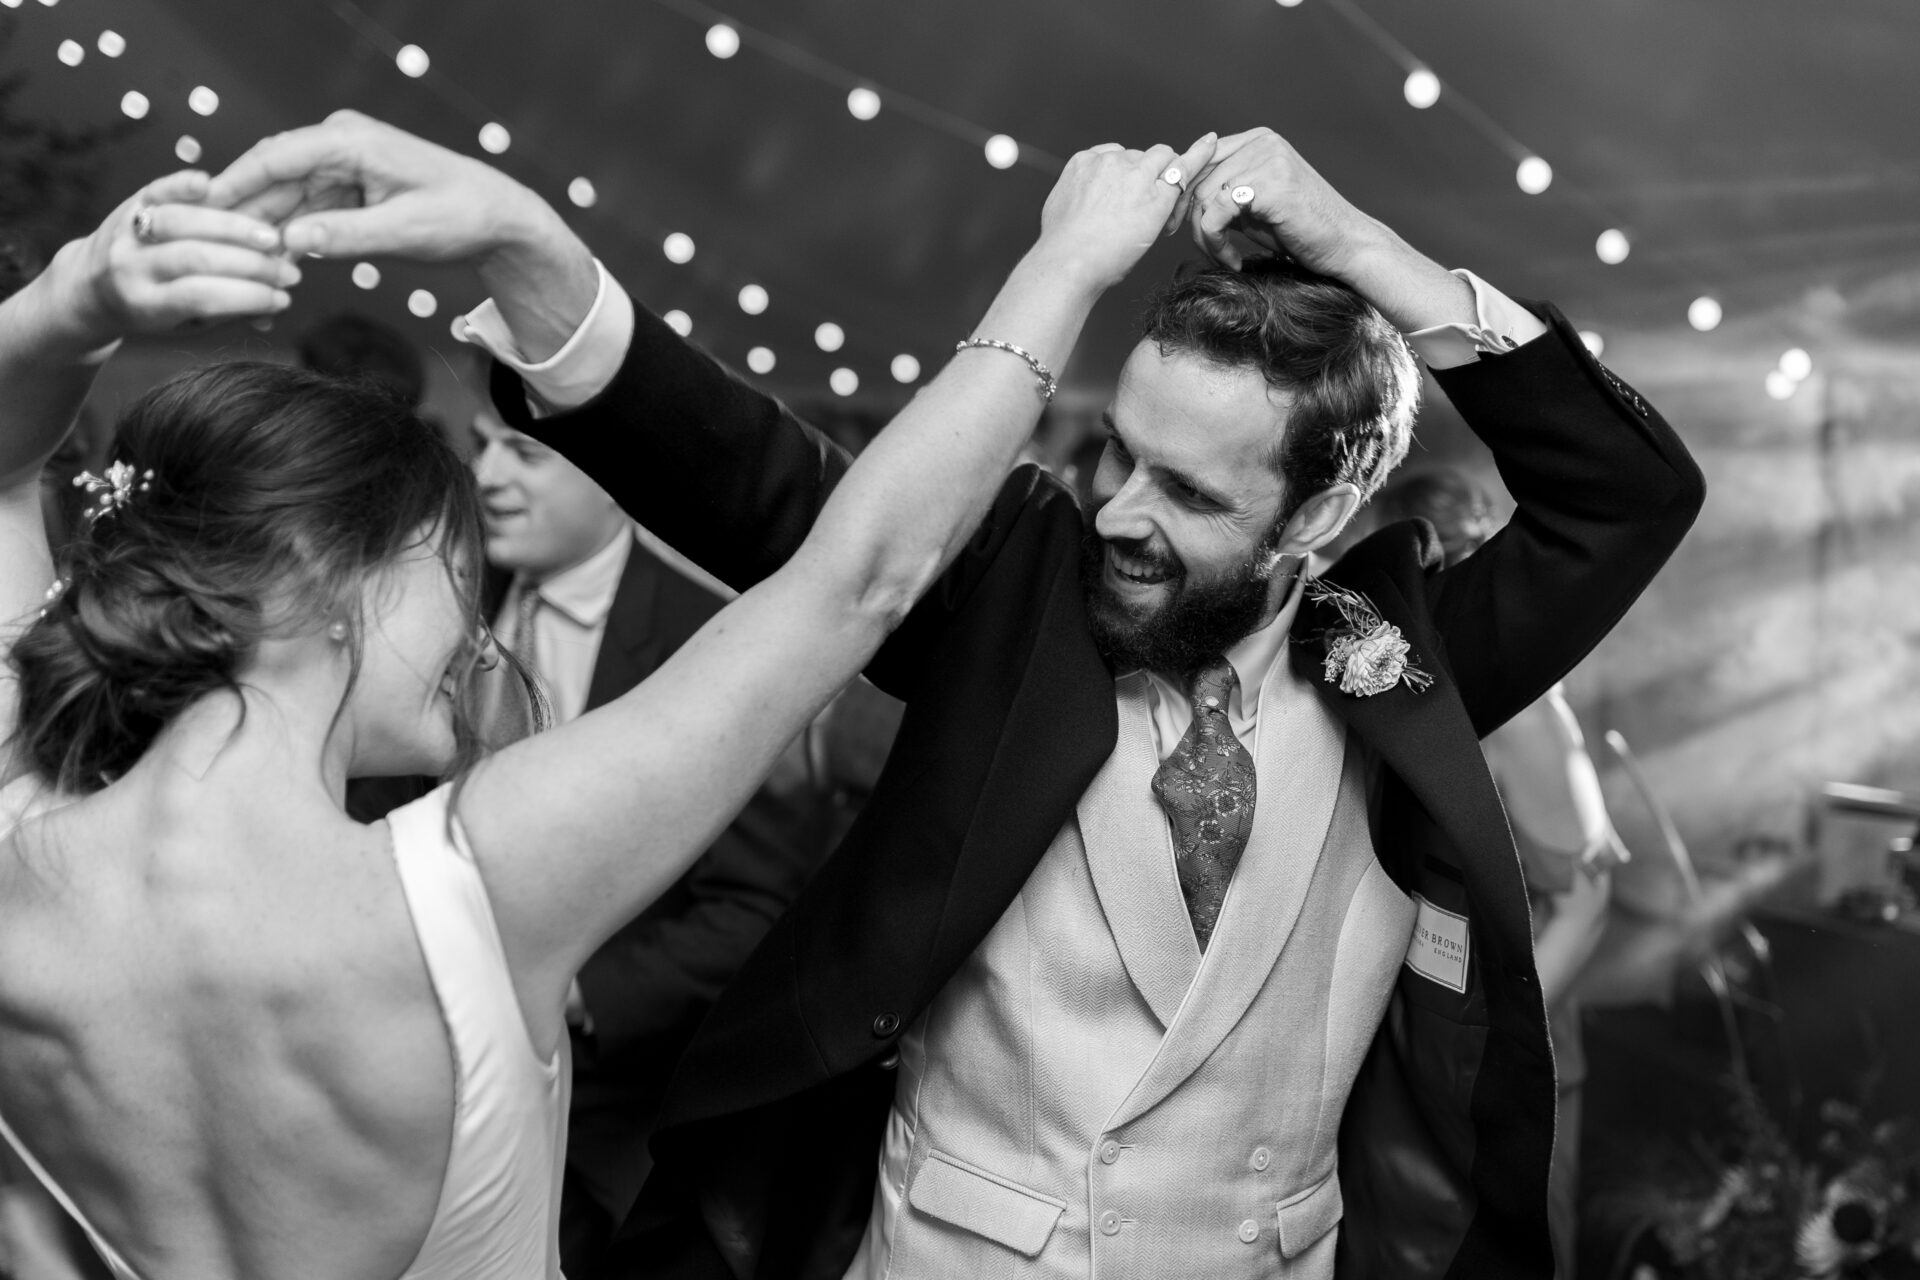 The bride and groom share their first dance at Somerset marquee wedding